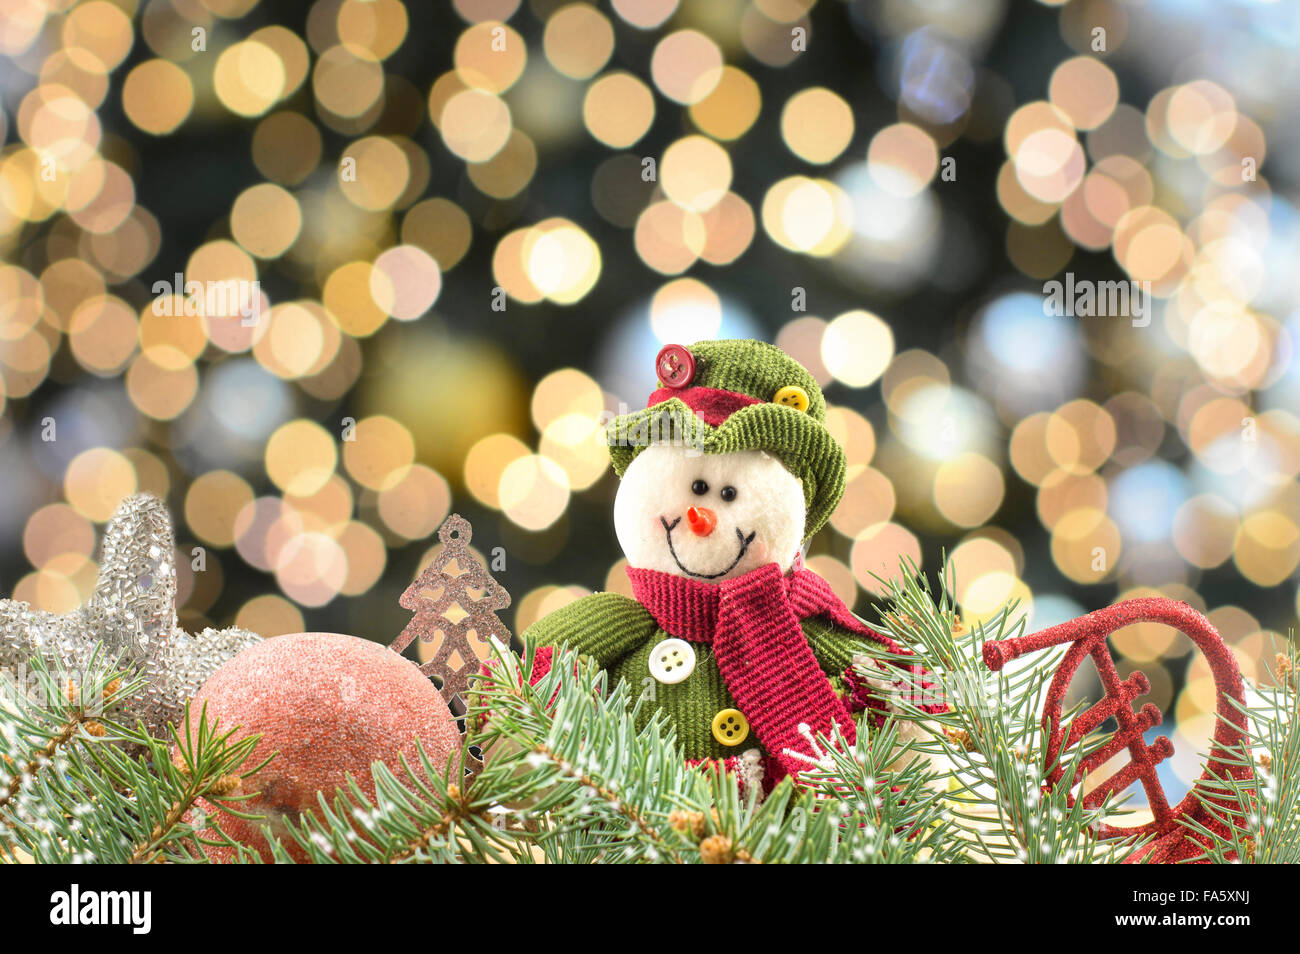 Snowman and Christmas ornaments with Christmas lights bokeh background Stock Photo